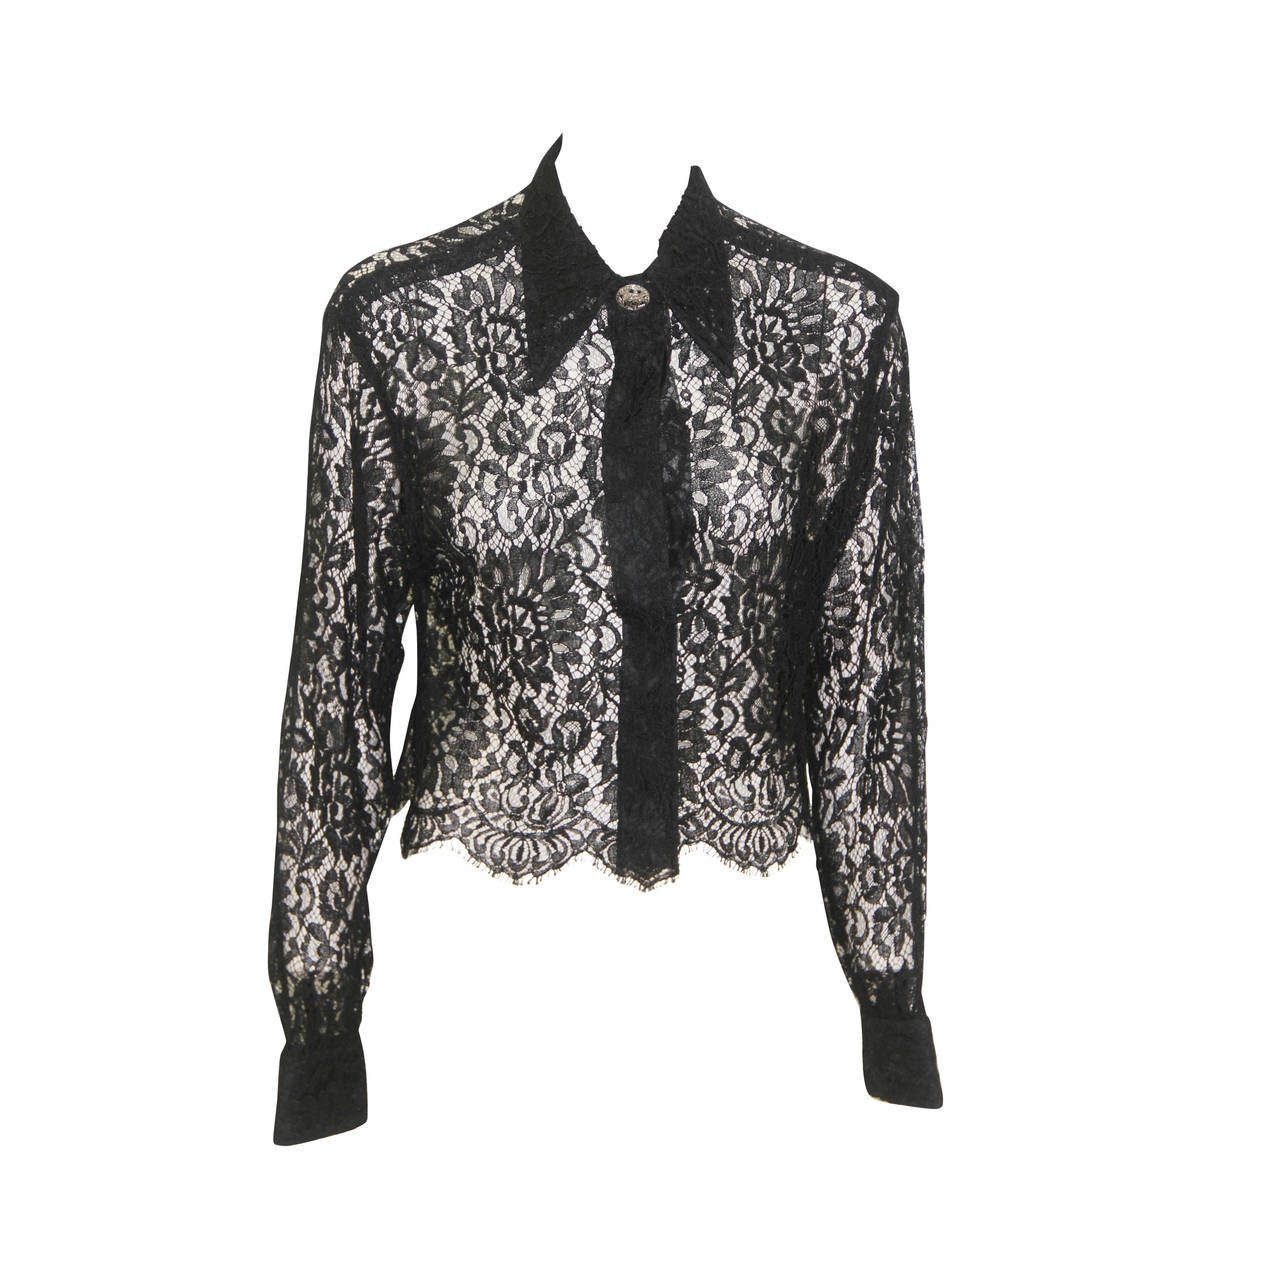 Gianni Versace Punk Lace Sheer Cropped Blouse Spring 1994 For Sale